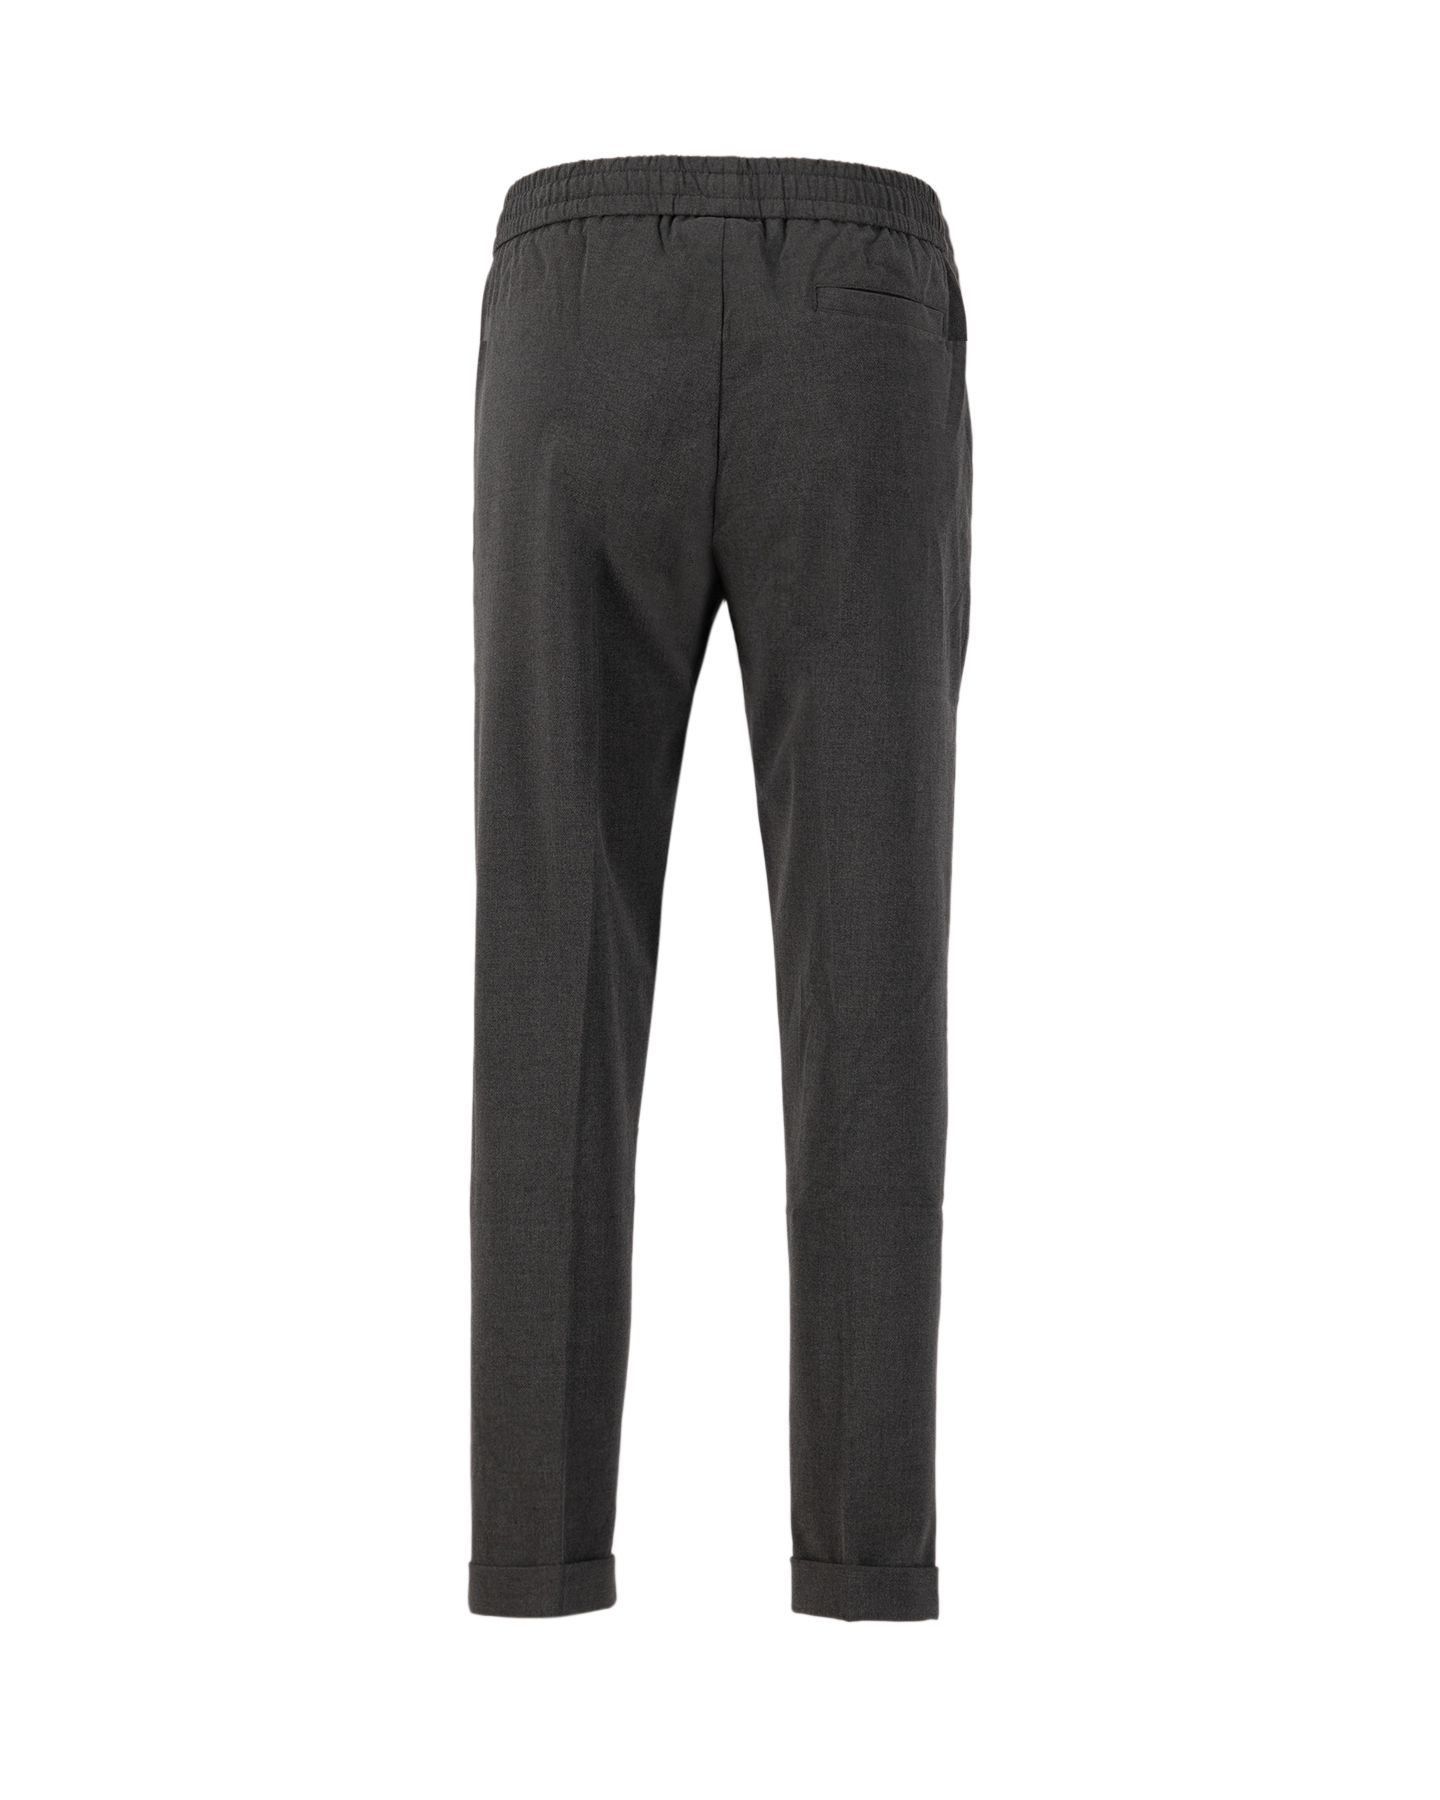 Olaf Hussein Olaf Wooly Slim Elasticated Trousers DONKERGRIJS 2